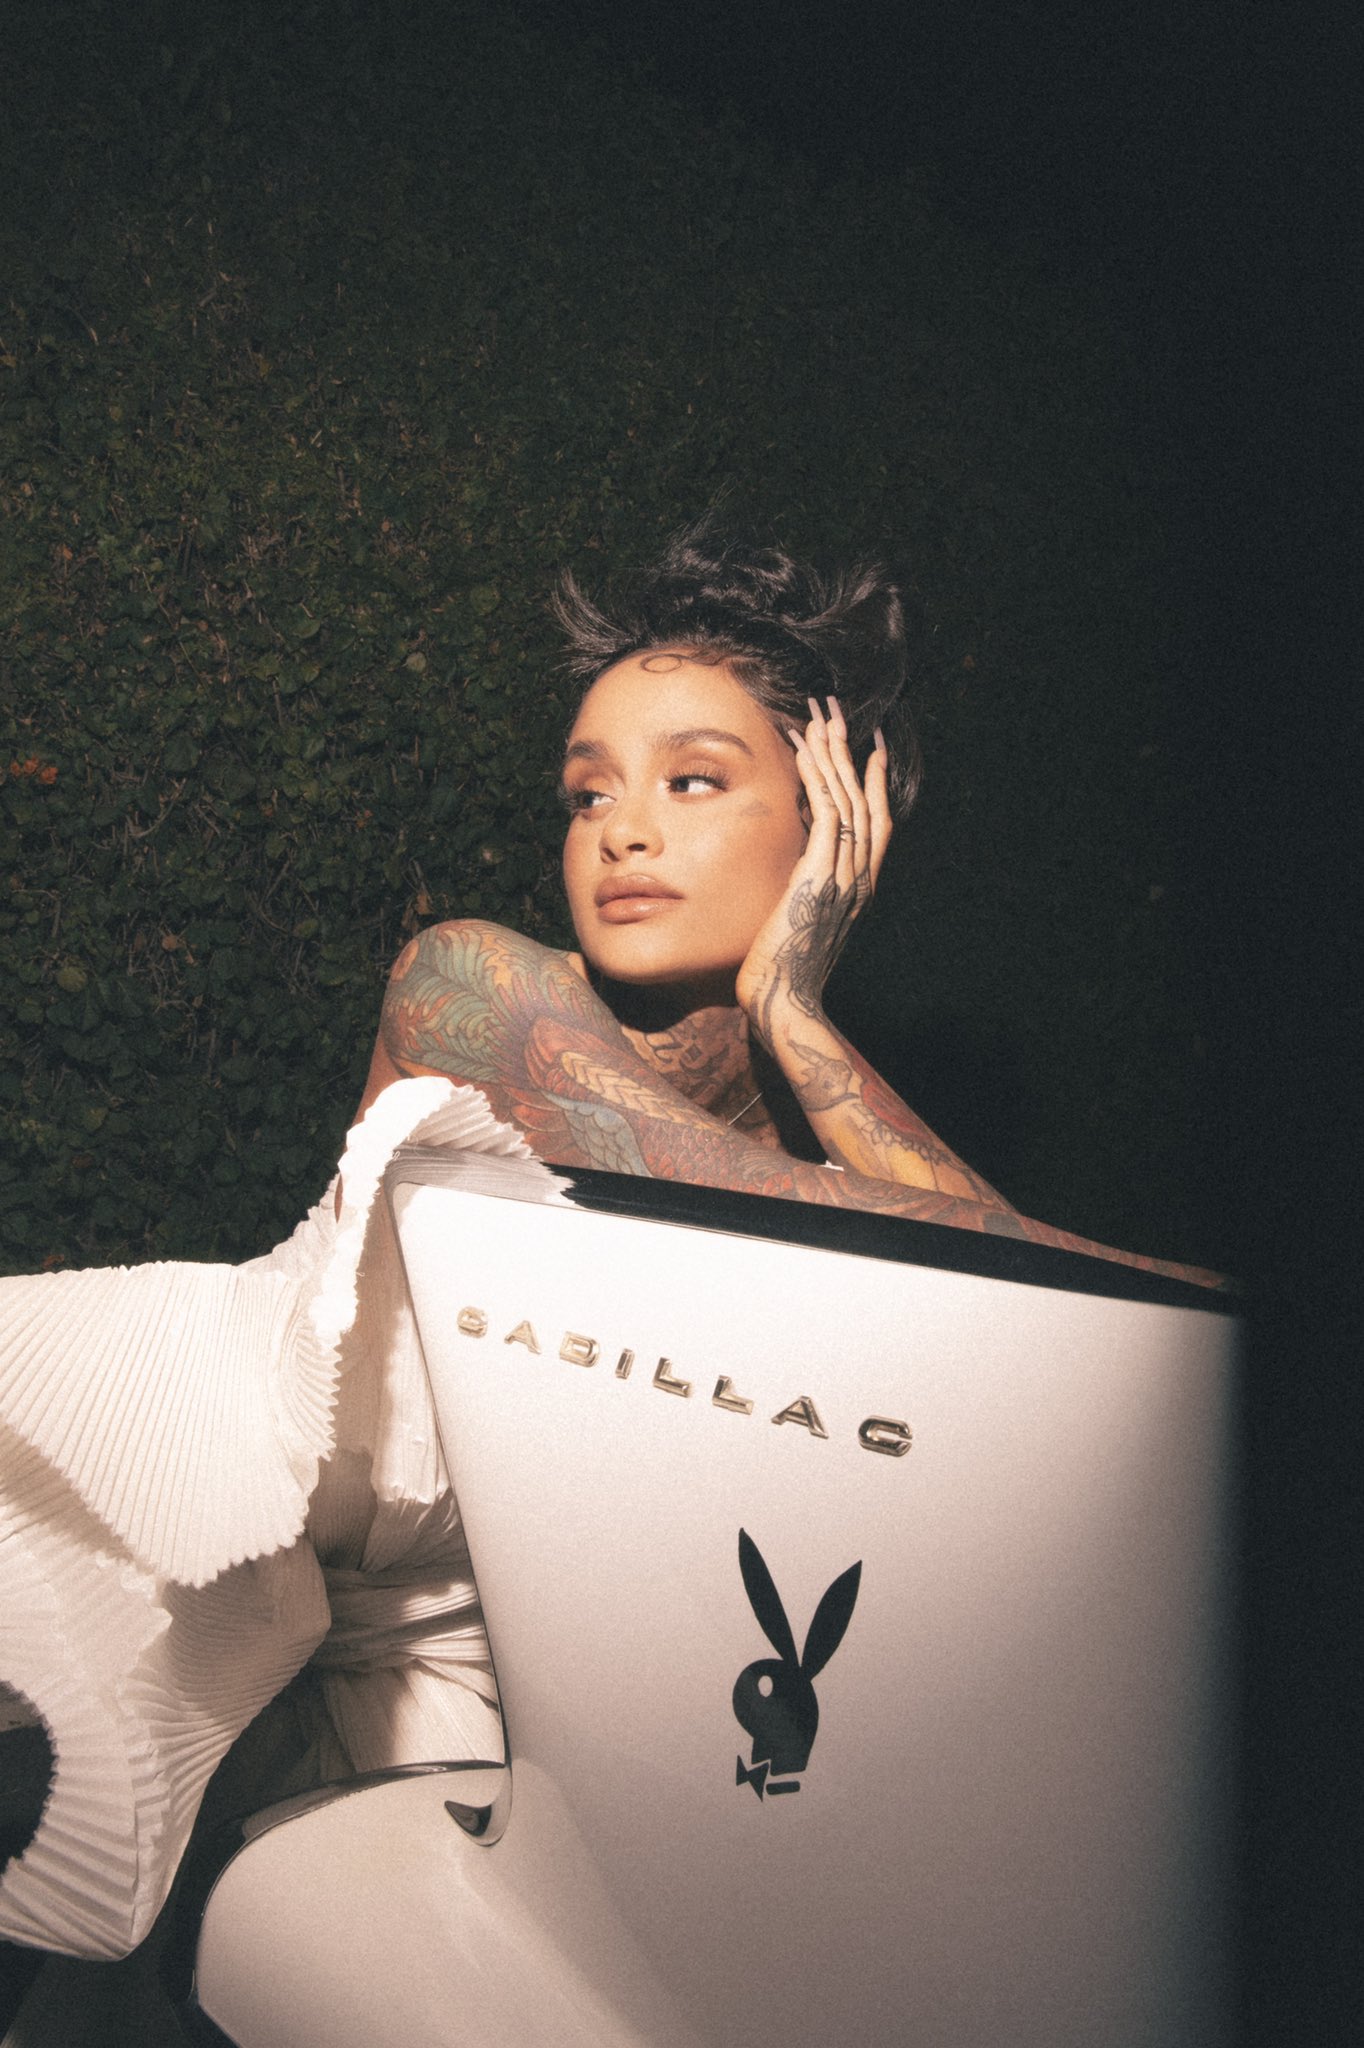 For the Culture. — Kehlani x Playboy 2am - TRIGGERED